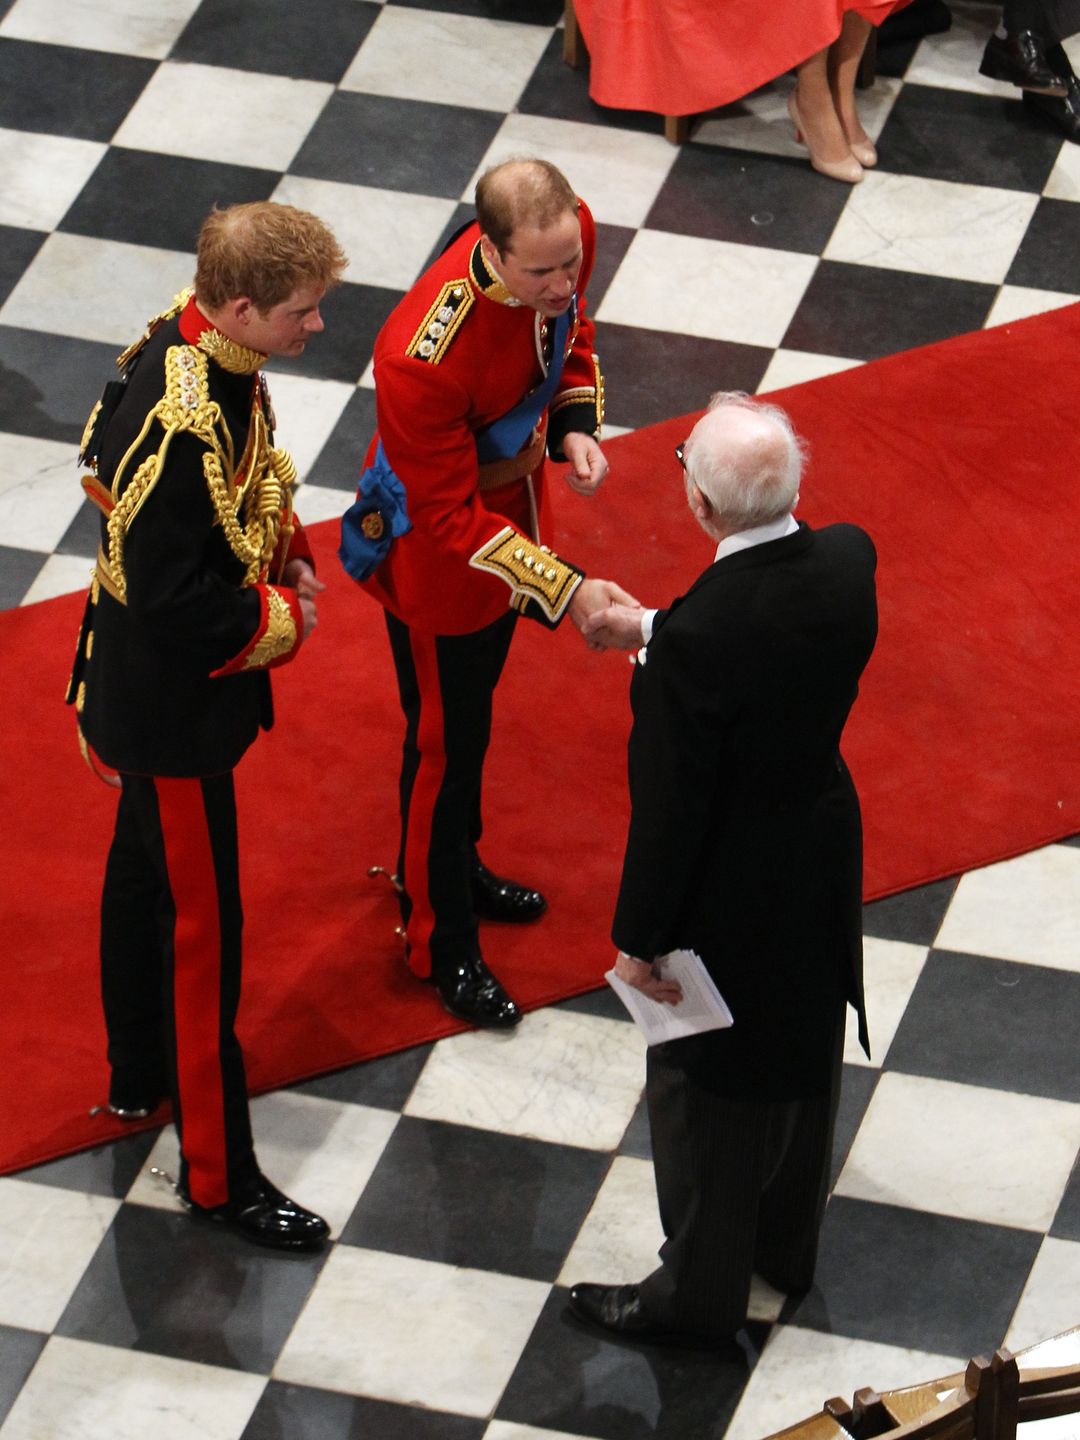 Prince William and Prince Harry shaking hands with an elderly gentleman at William's wedding